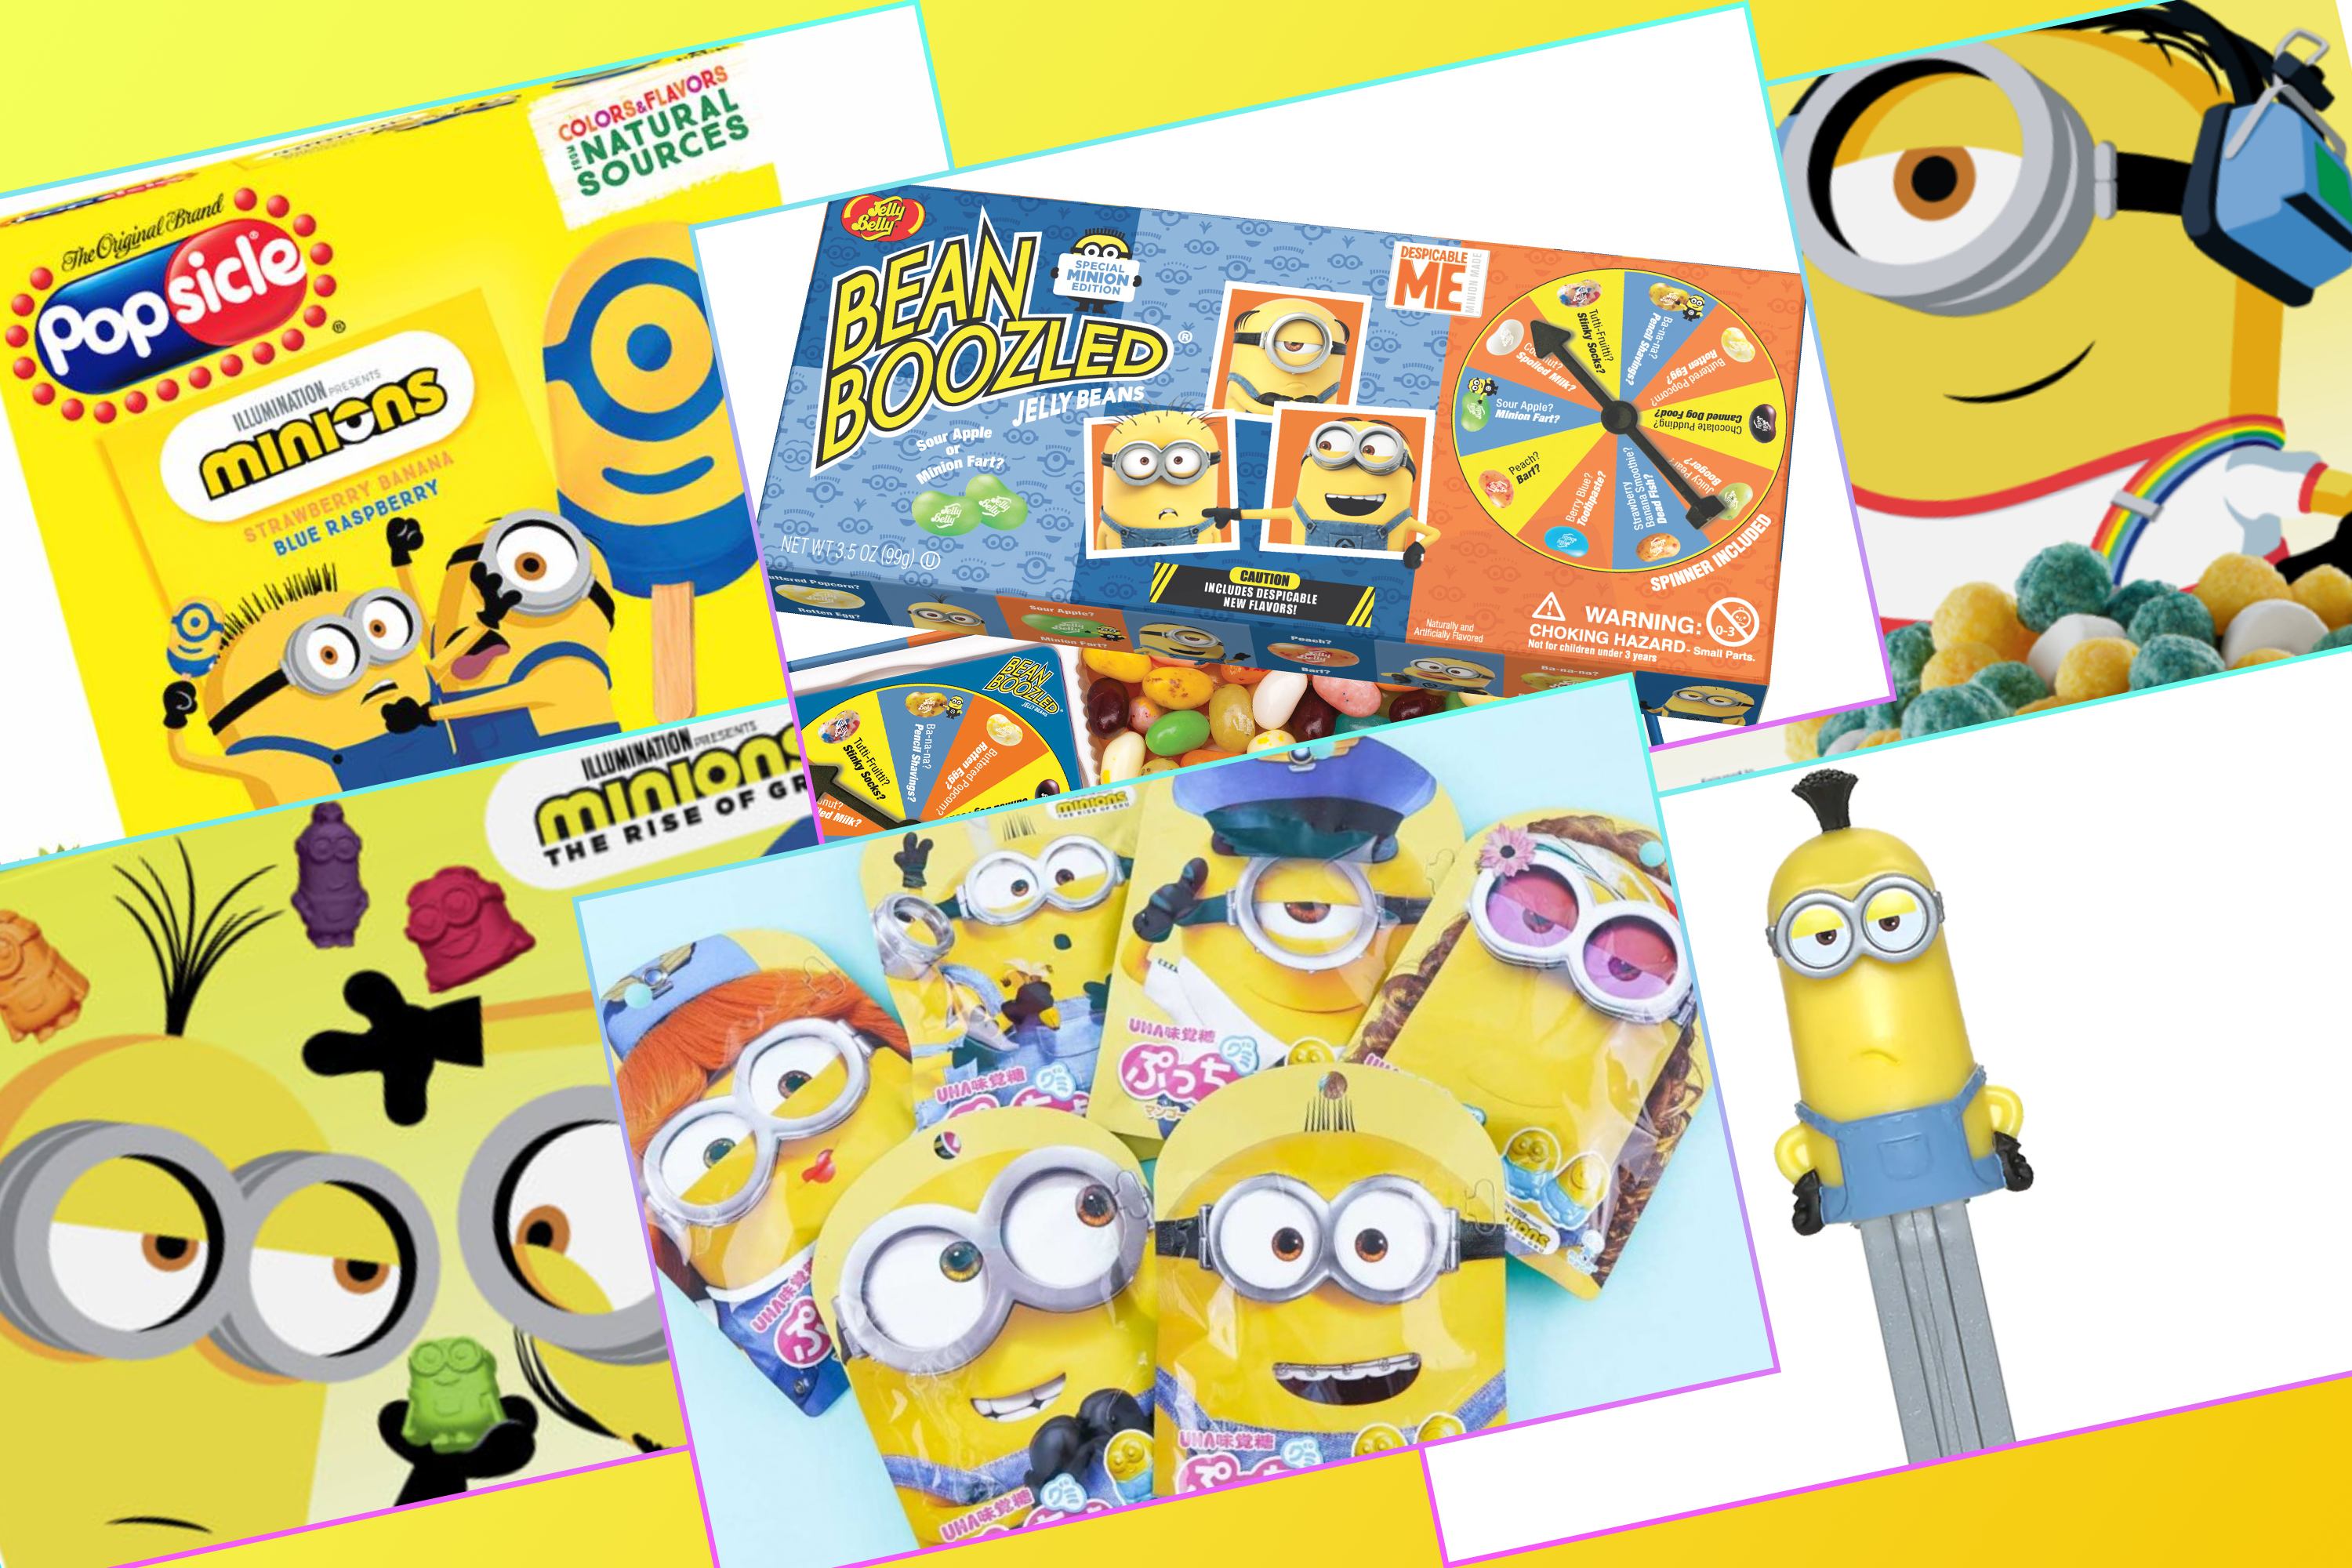 A collage of images of Minion-themed food items, including a Pez dispenser, gummies, fruit snacks, and popsicles.